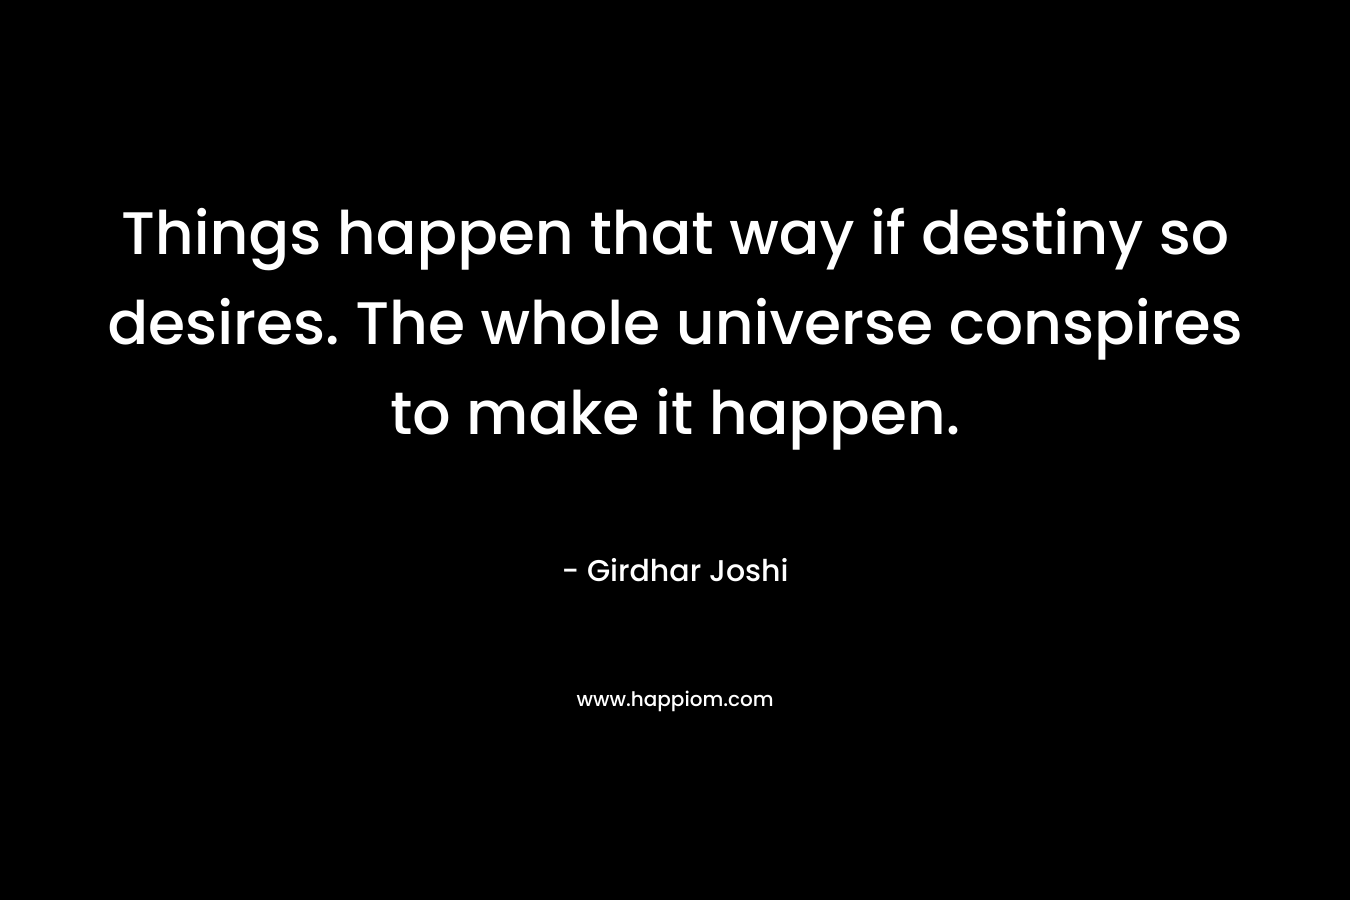 Things happen that way if destiny so desires. The whole universe conspires to make it happen. – Girdhar Joshi